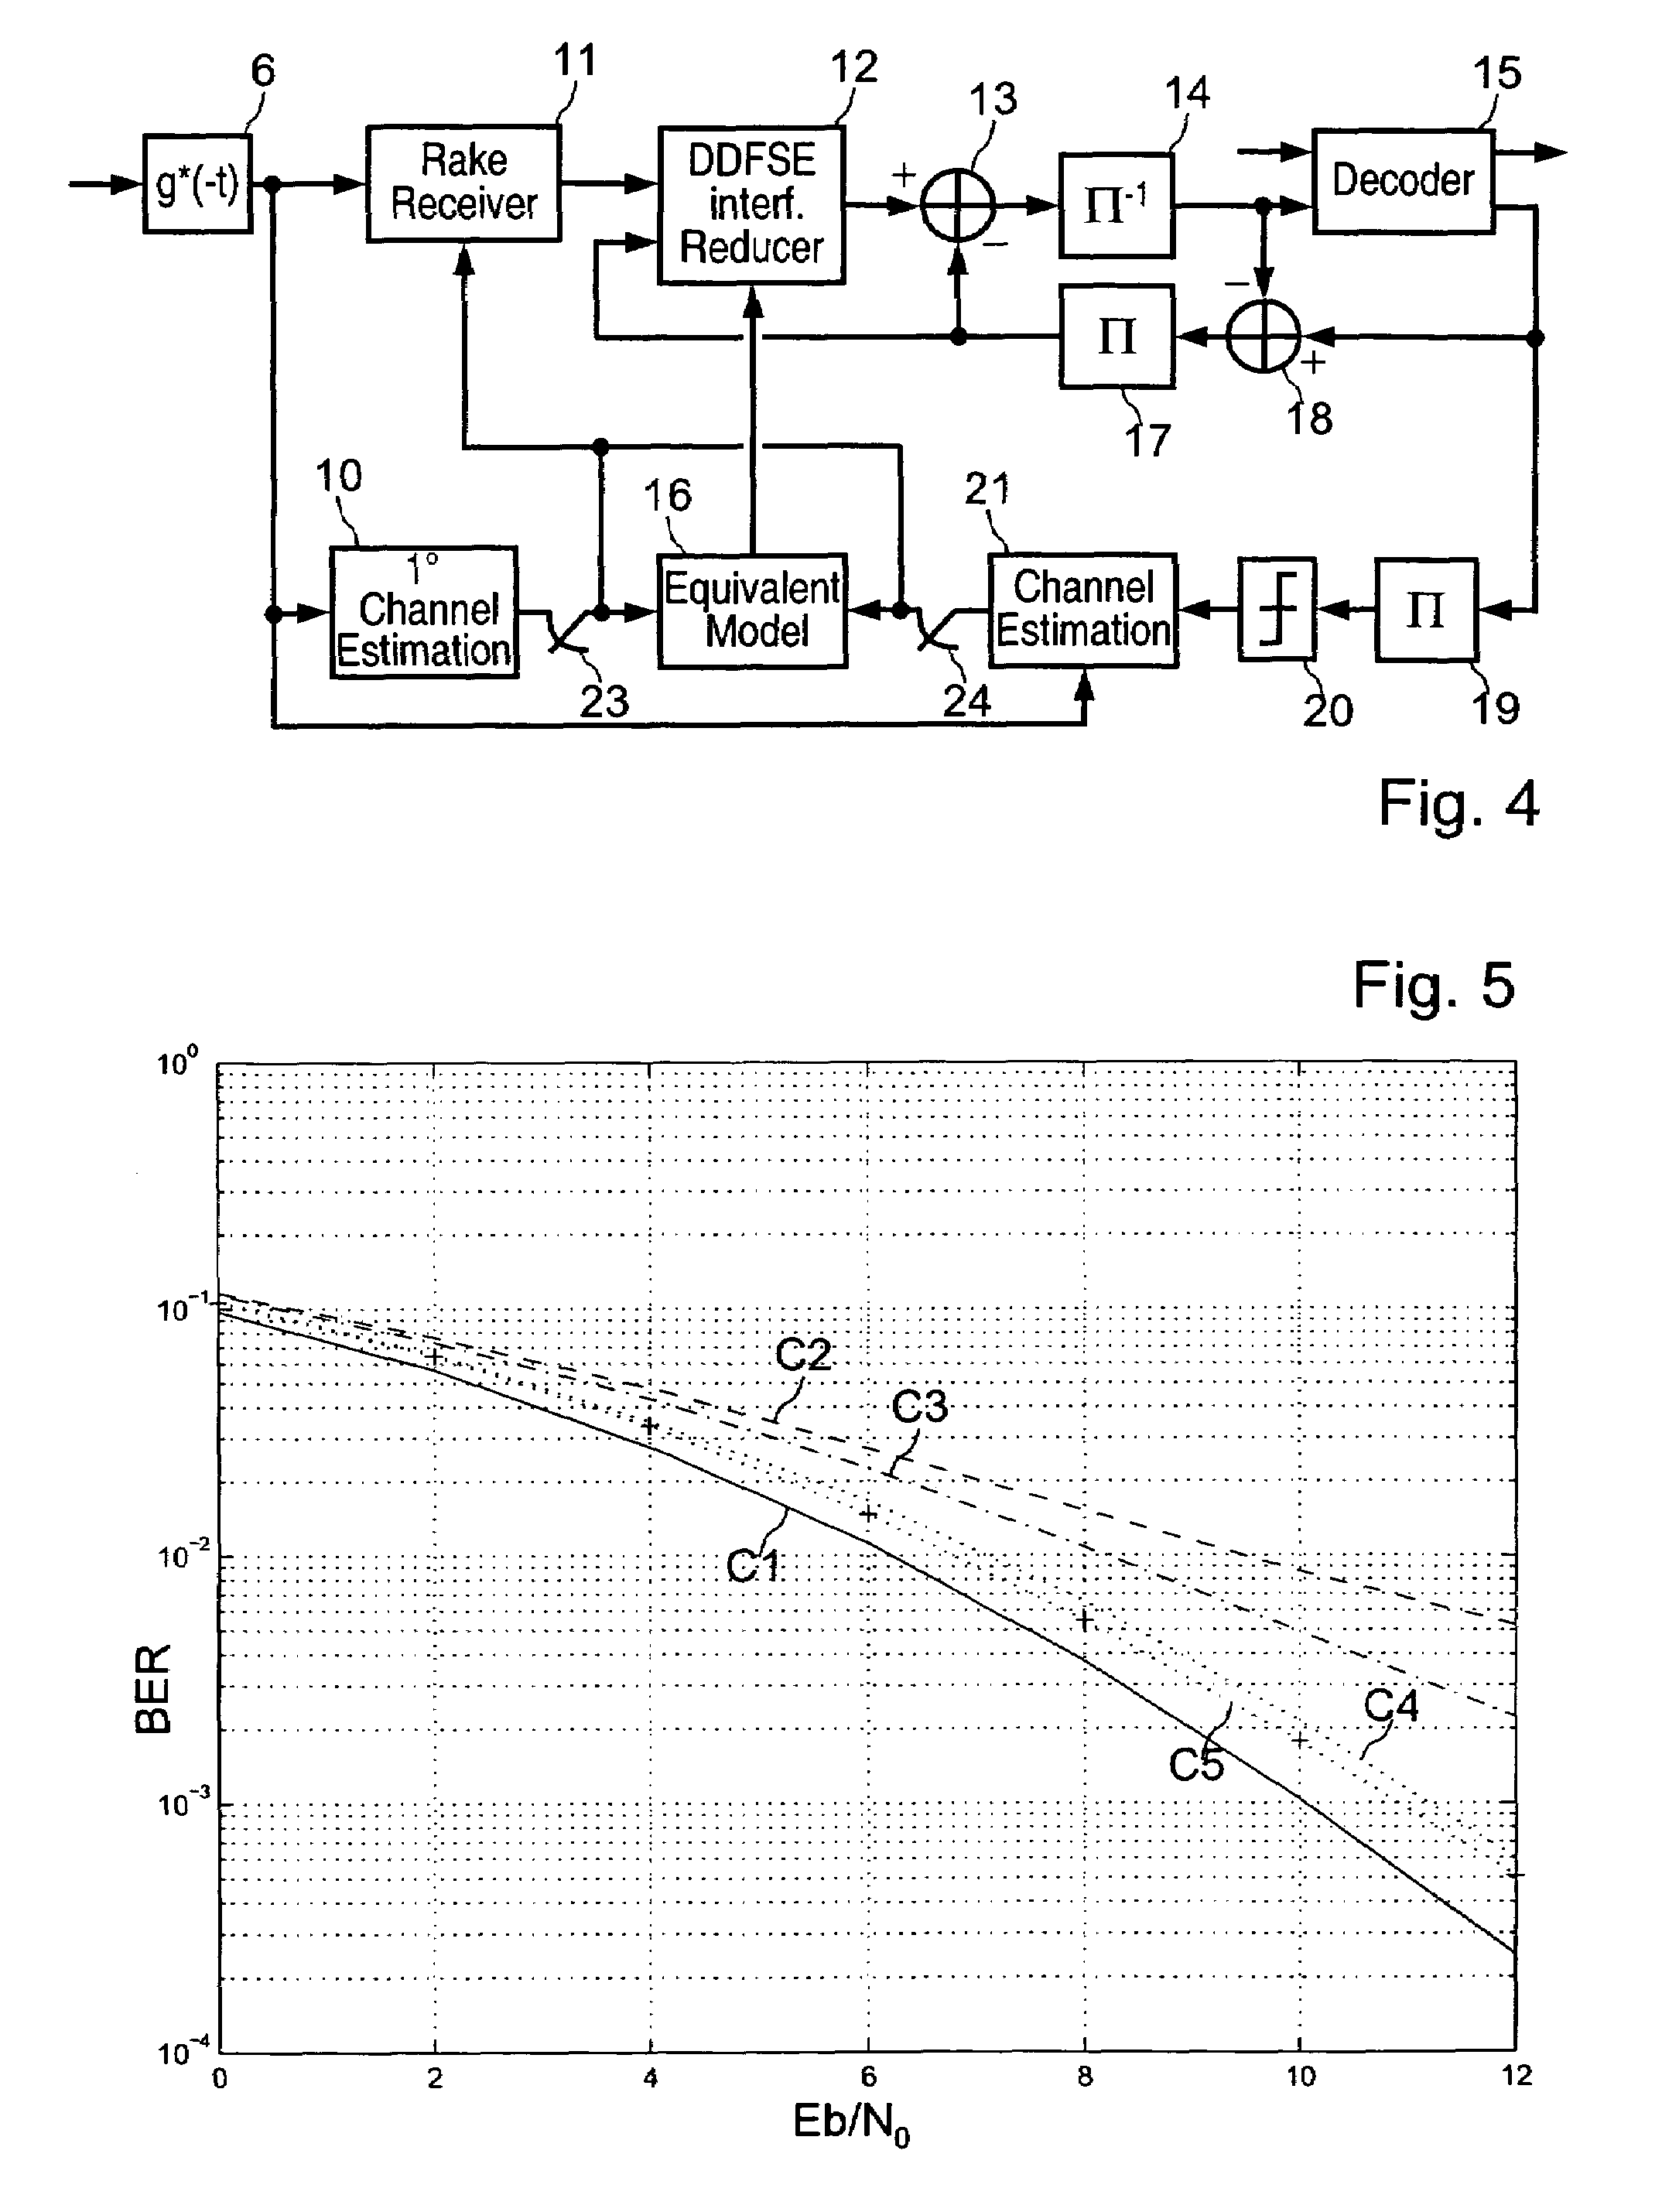 Sub-optimal iterative receiver method and system for a high-bit-rate CDMA transmission system